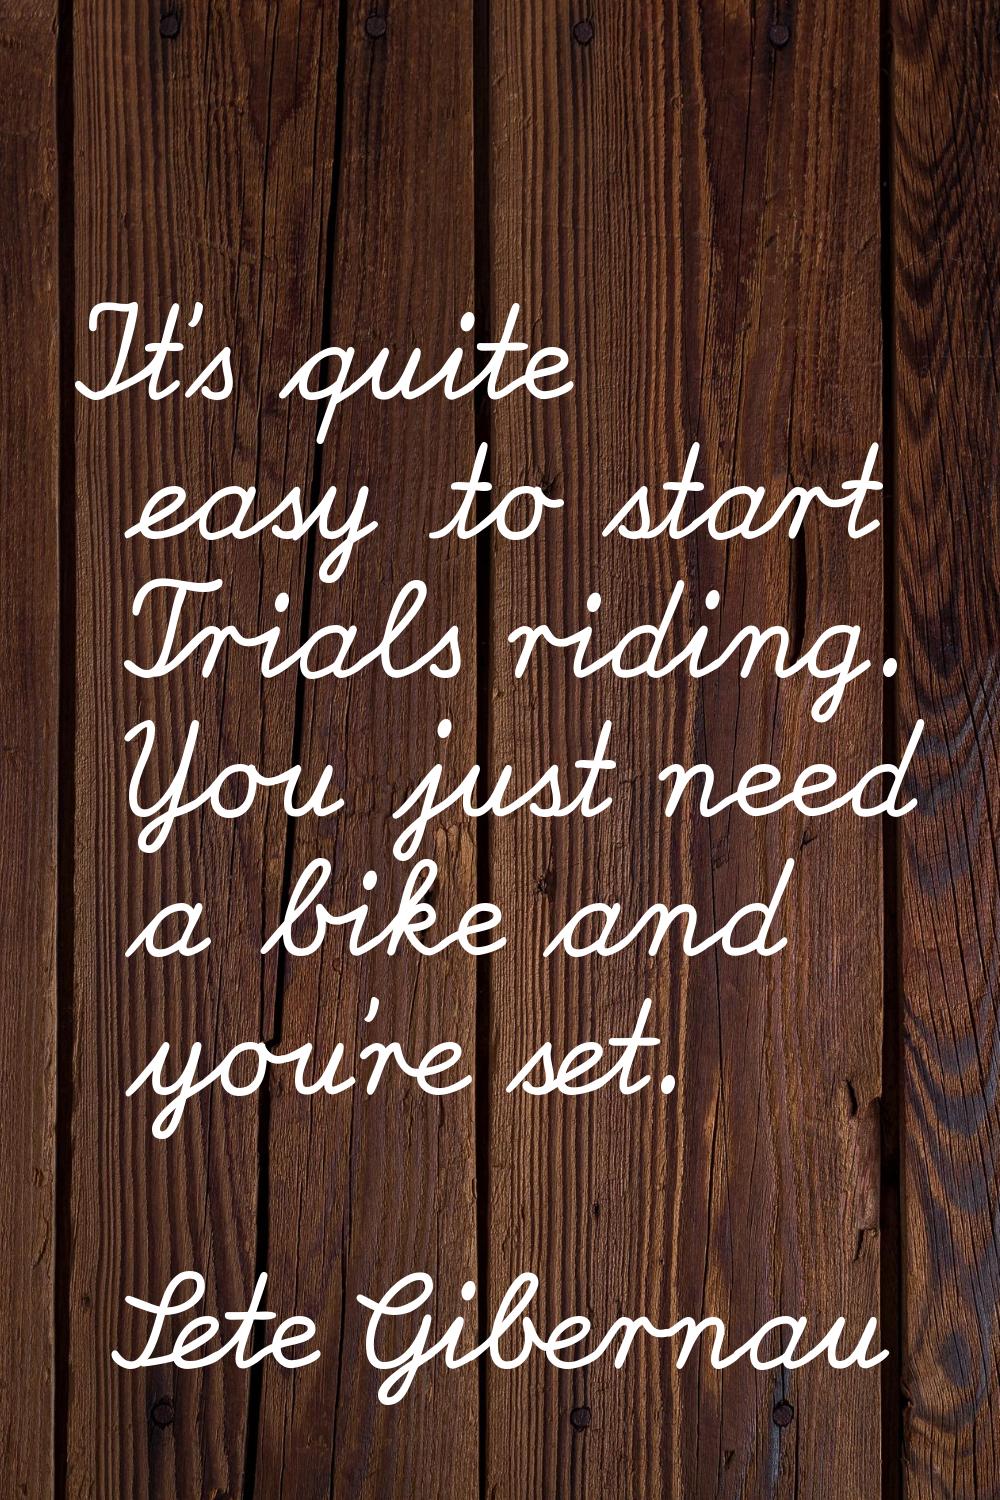 It's quite easy to start Trials riding. You just need a bike and you're set.